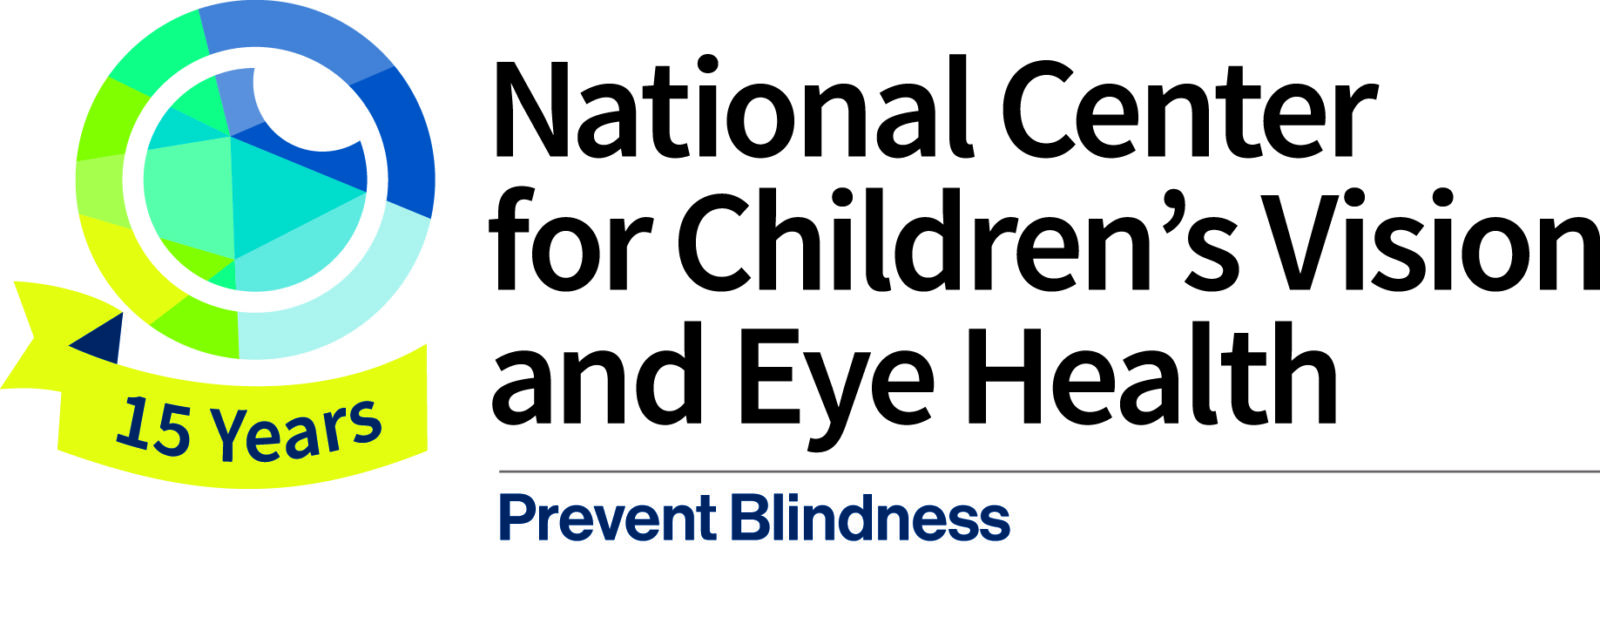 The National Center for Chldren's Vision and Eye Health at Prevent Blindness - 15th anniversary logo